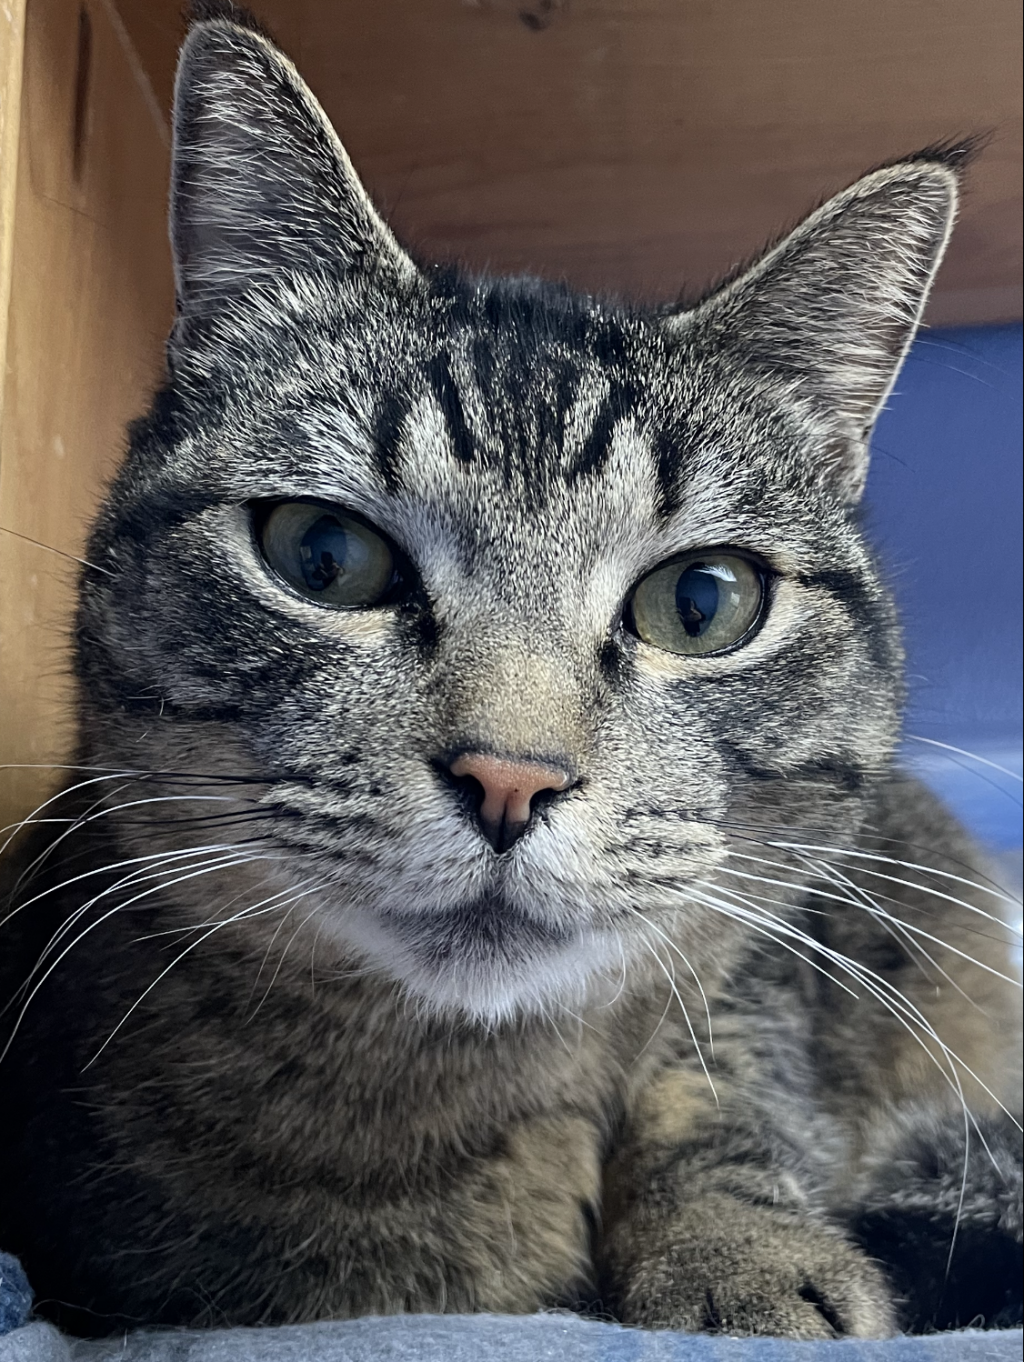 Catman is a 5 year old neutered male Tabby. He is super sweet with a calm demeanor. Brother to Goose. Likes to have the bridge of his nose petted. Good with other cats and dogs.